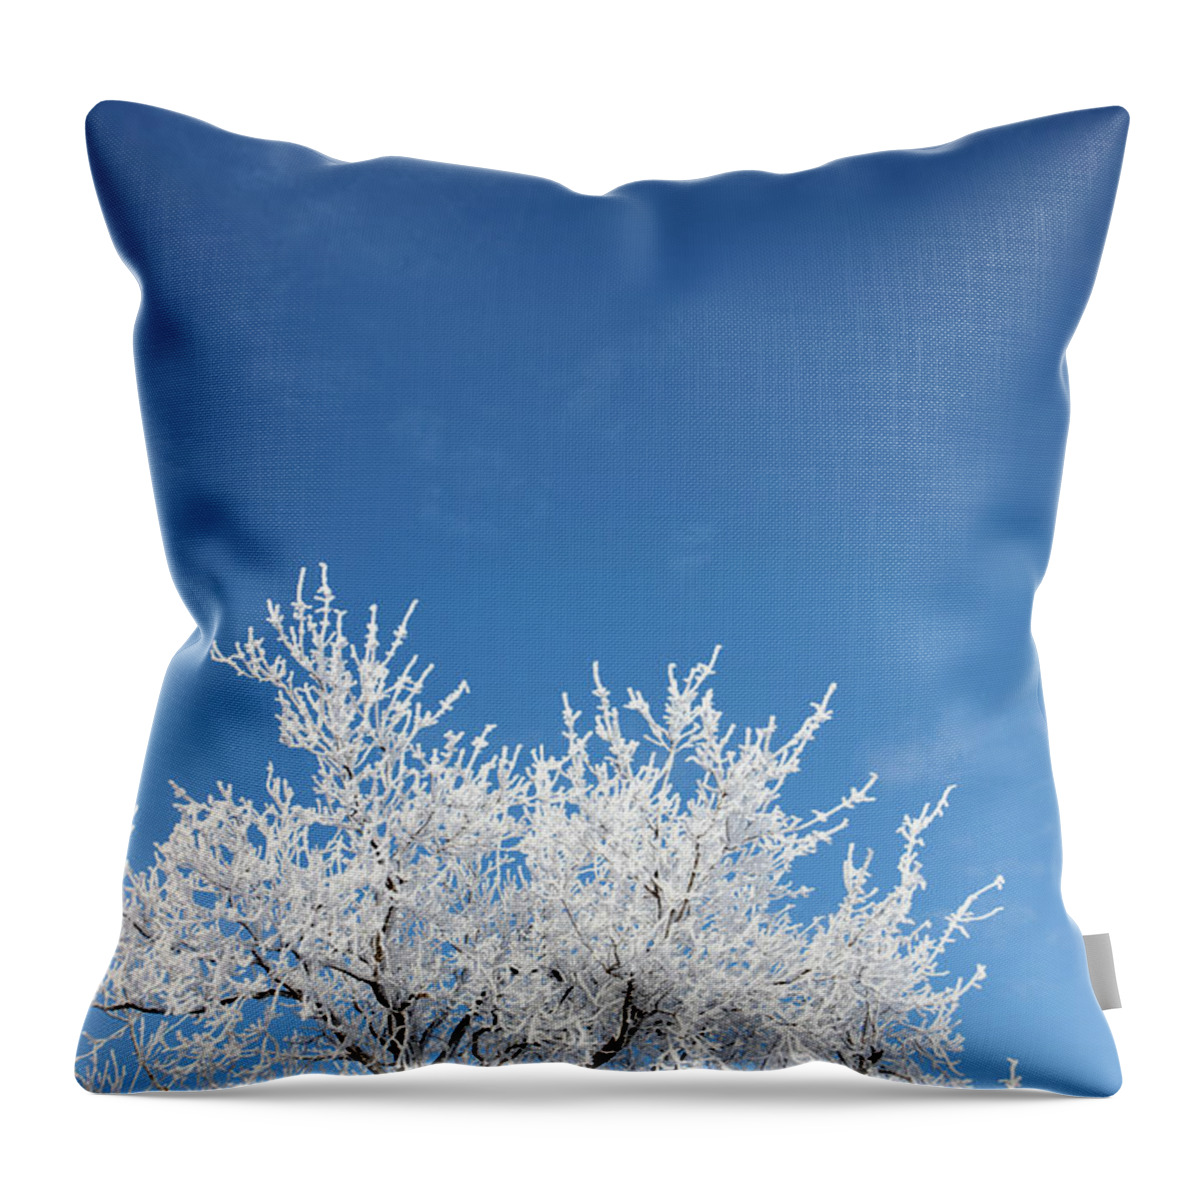 Snow Throw Pillow featuring the photograph Frost On Tree Branches During Winter by Joe Fox